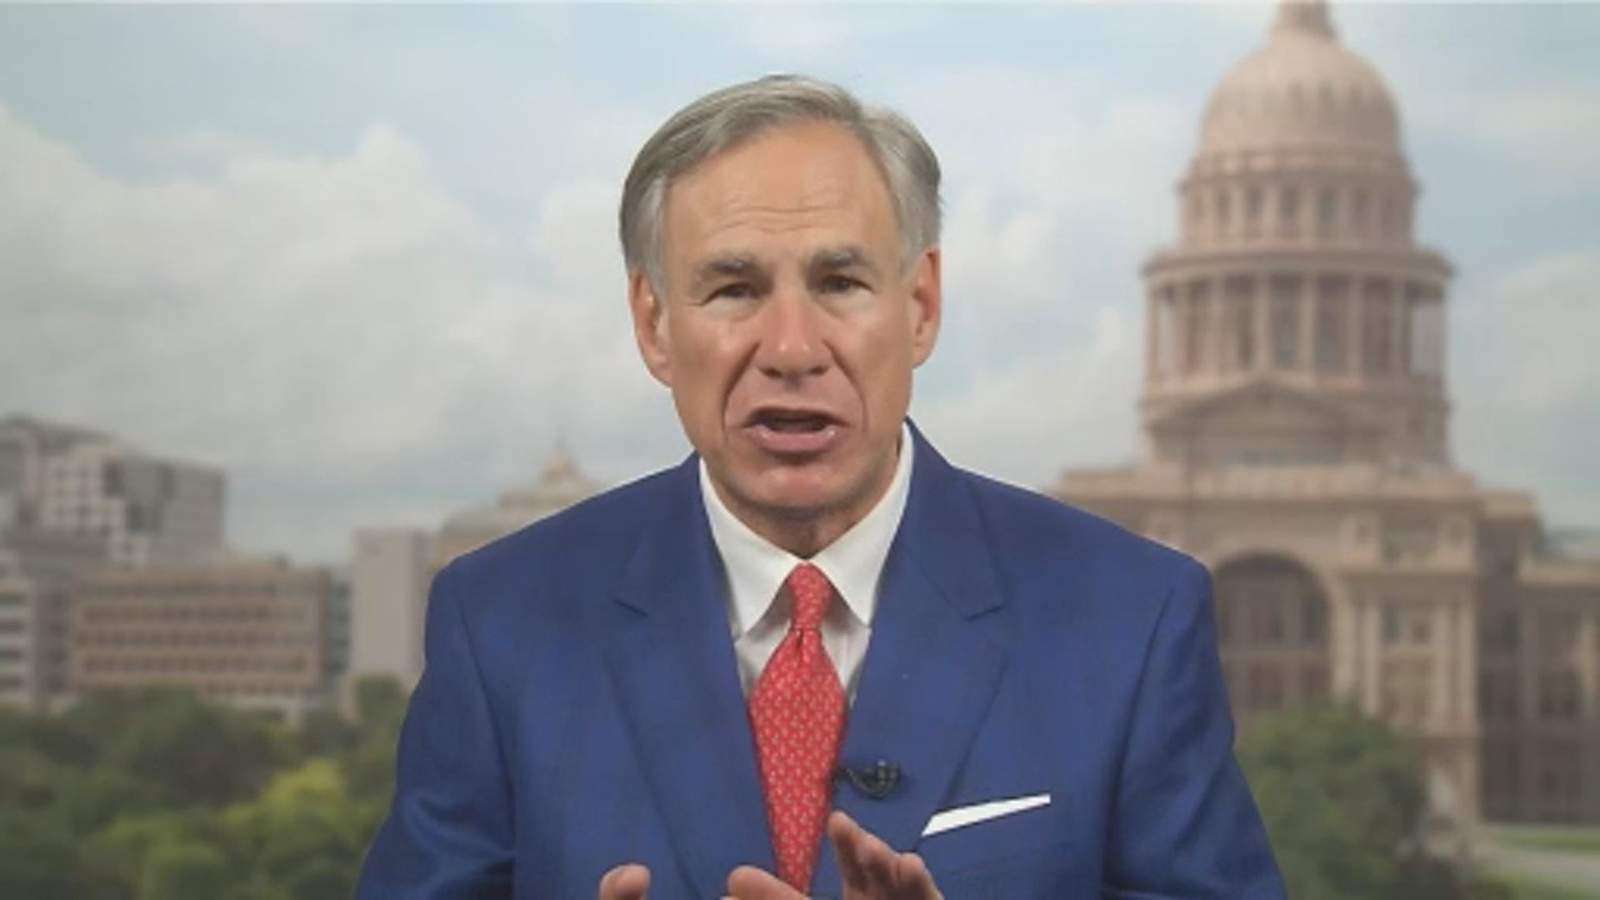 ‘They do absolutely nothing:’ Gov. Greg Abbott blasts local leaders for inaction to enforce current orders